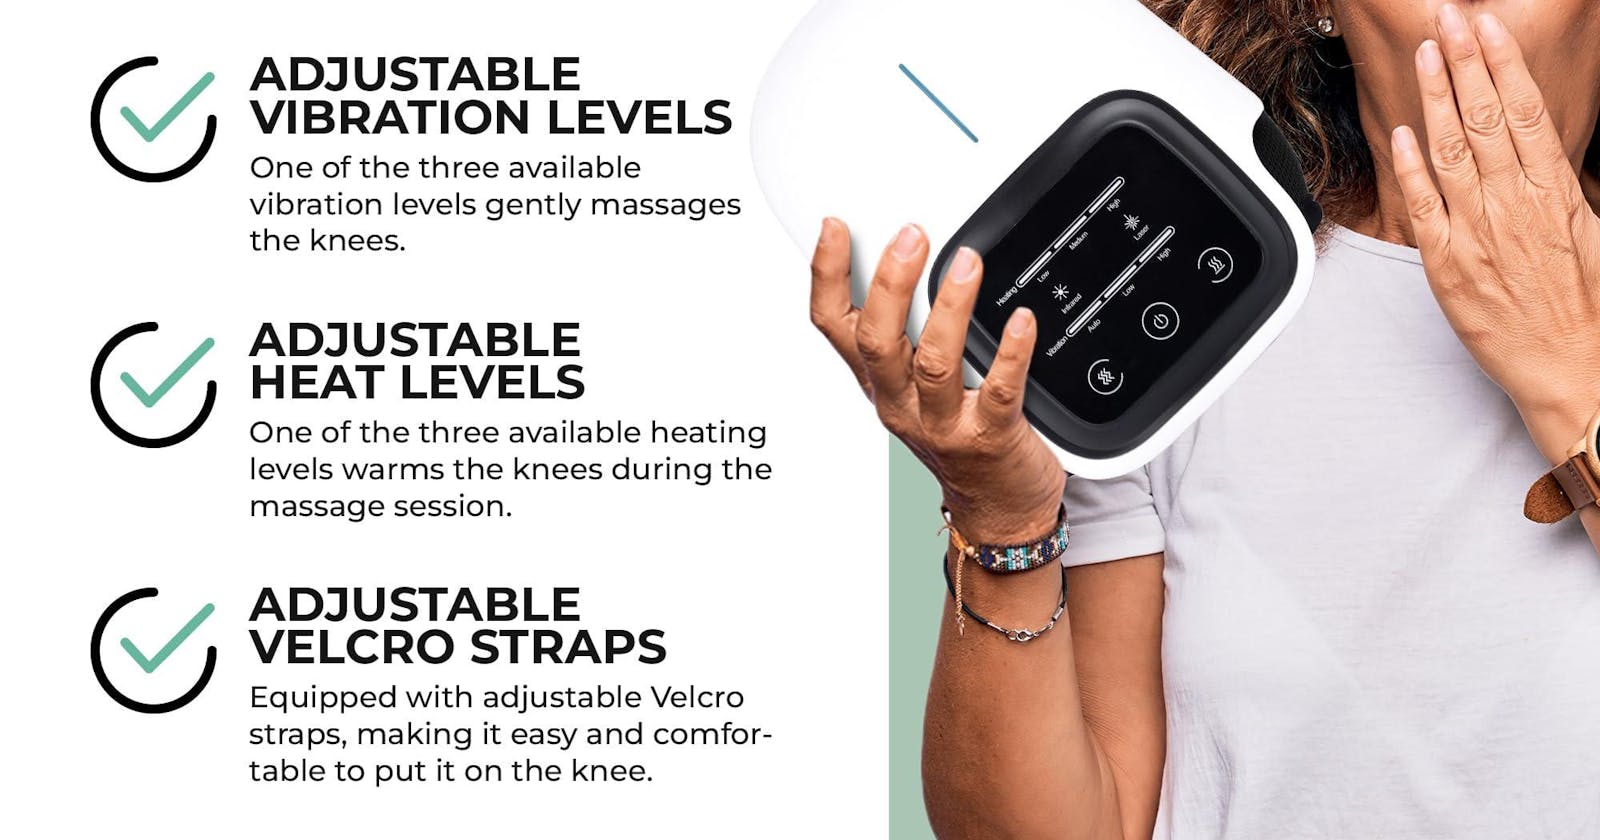 Nooro Knee Massager Reviews: Is It Worth It Or Not? Where To Buy , Customer Warning Alert! Cons, Feedback from official Website!